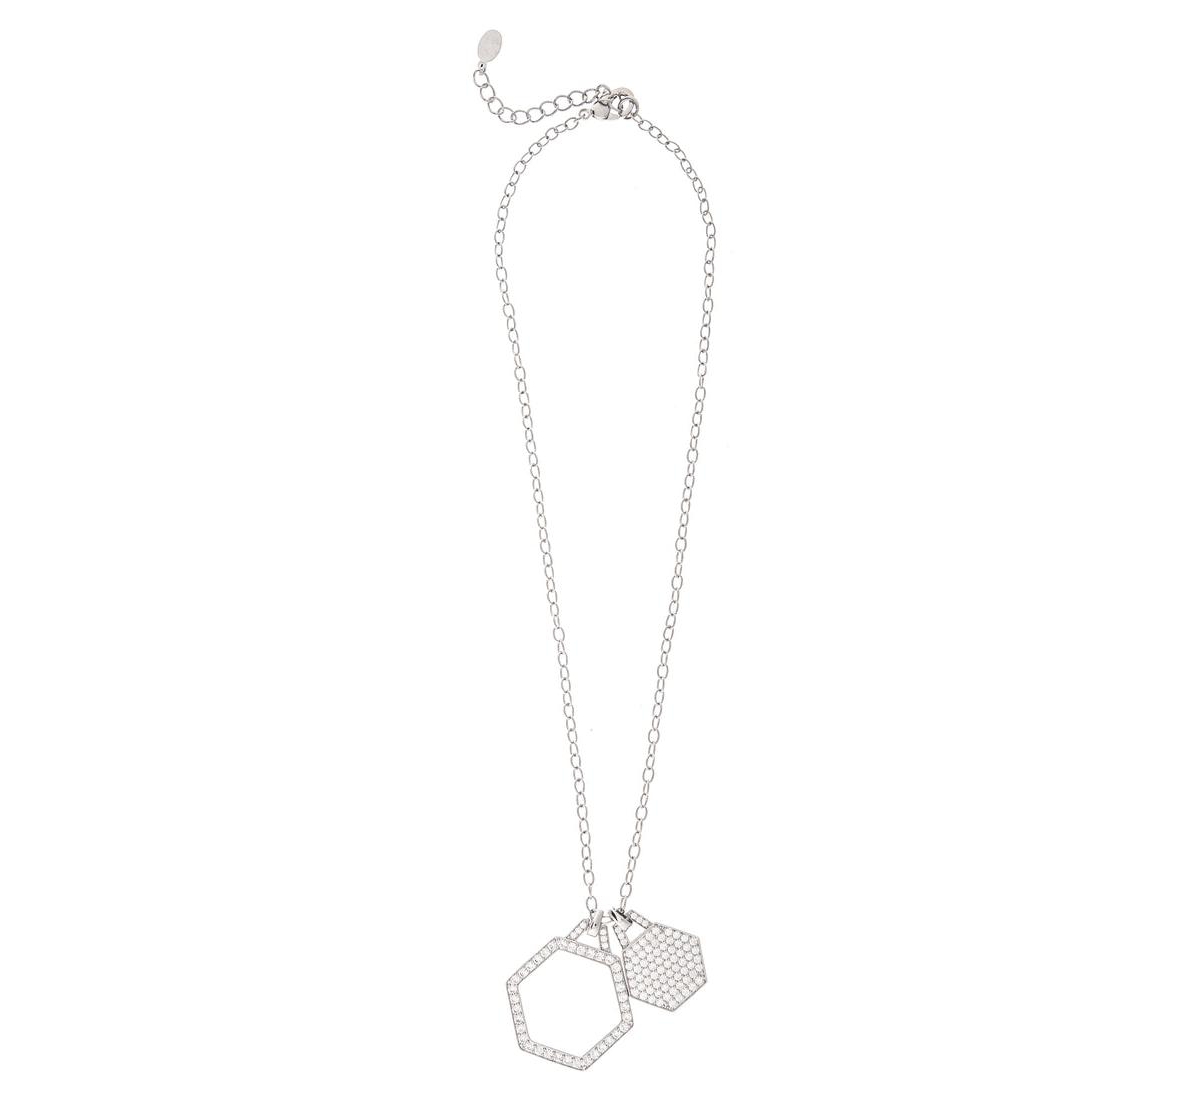 Rhodium Double Cubic Zirconia Hexagon Charm Necklace - Silver with clear cubic zirconia